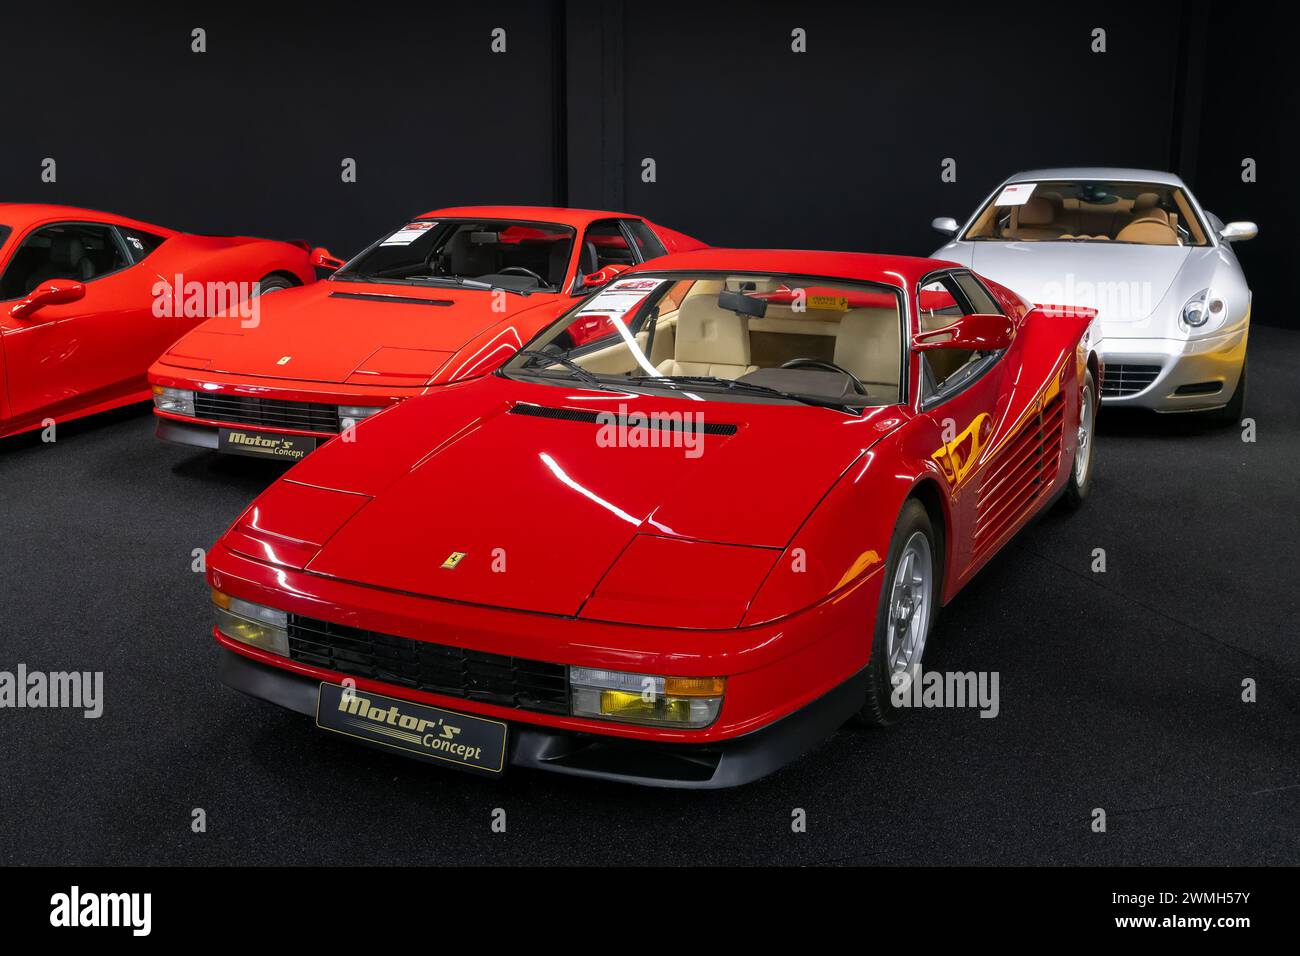 Luxembourg City, Luxembourg - Focus on a red Ferrari Testarossa in a showroom. Stock Photo